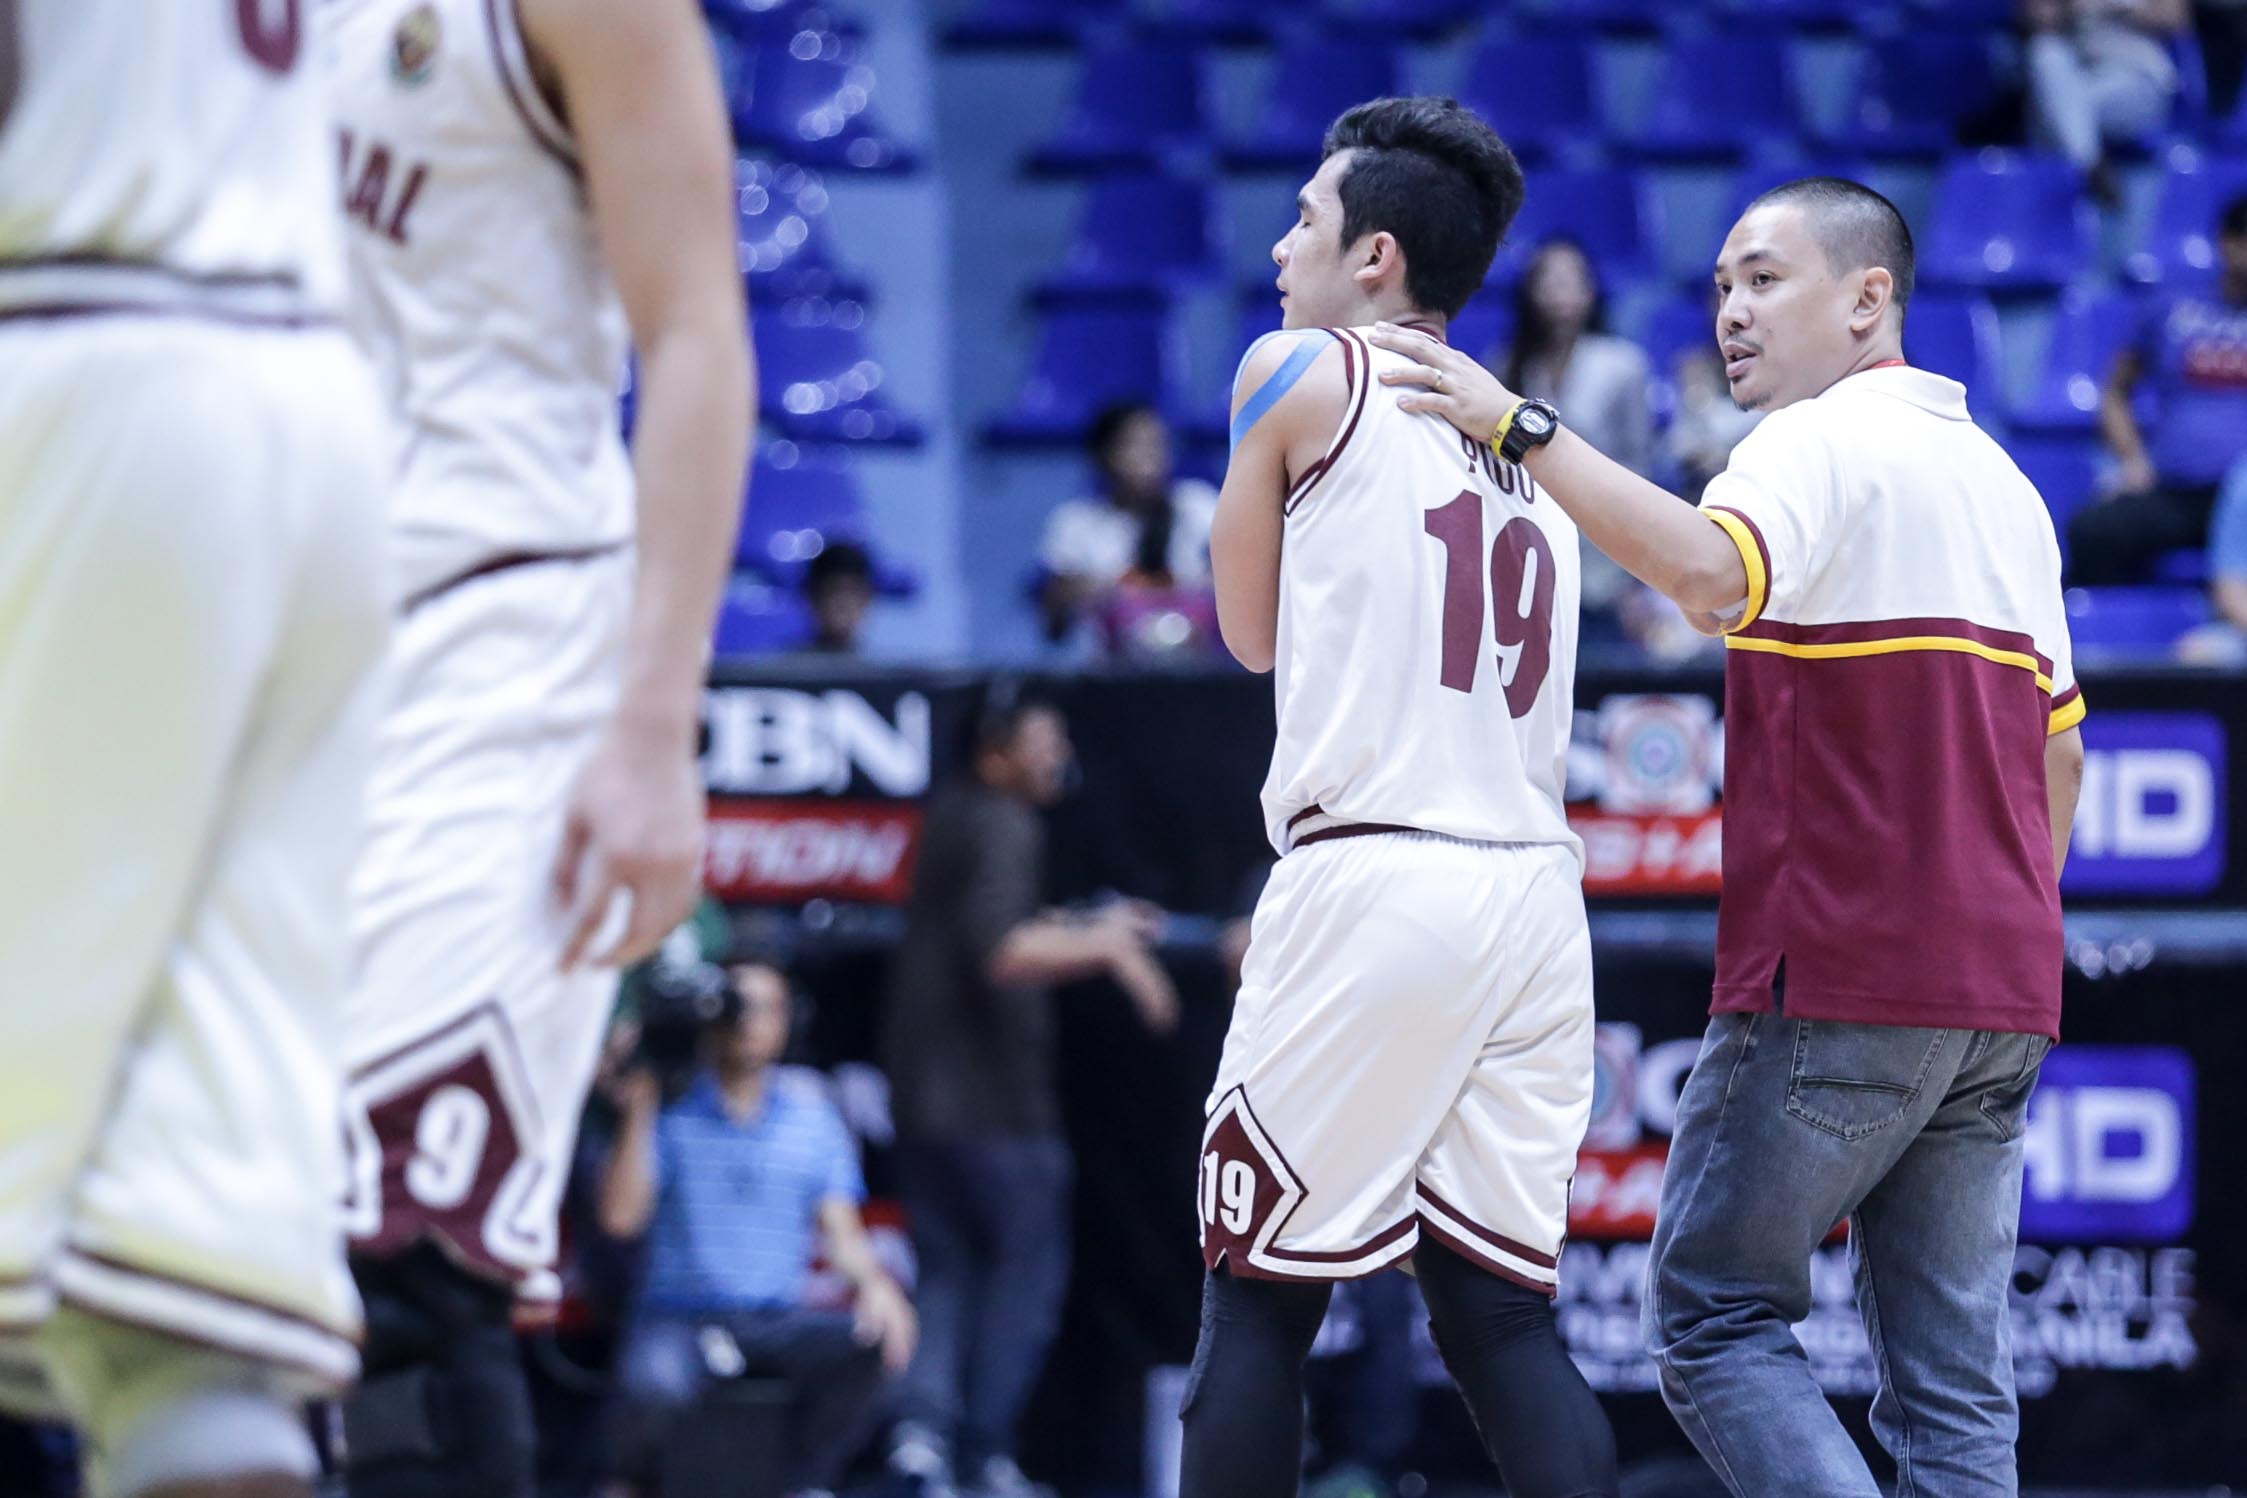 Perpetual Help's Keith Pido. Photo by Tristan Tamayo/INQUIRER.net